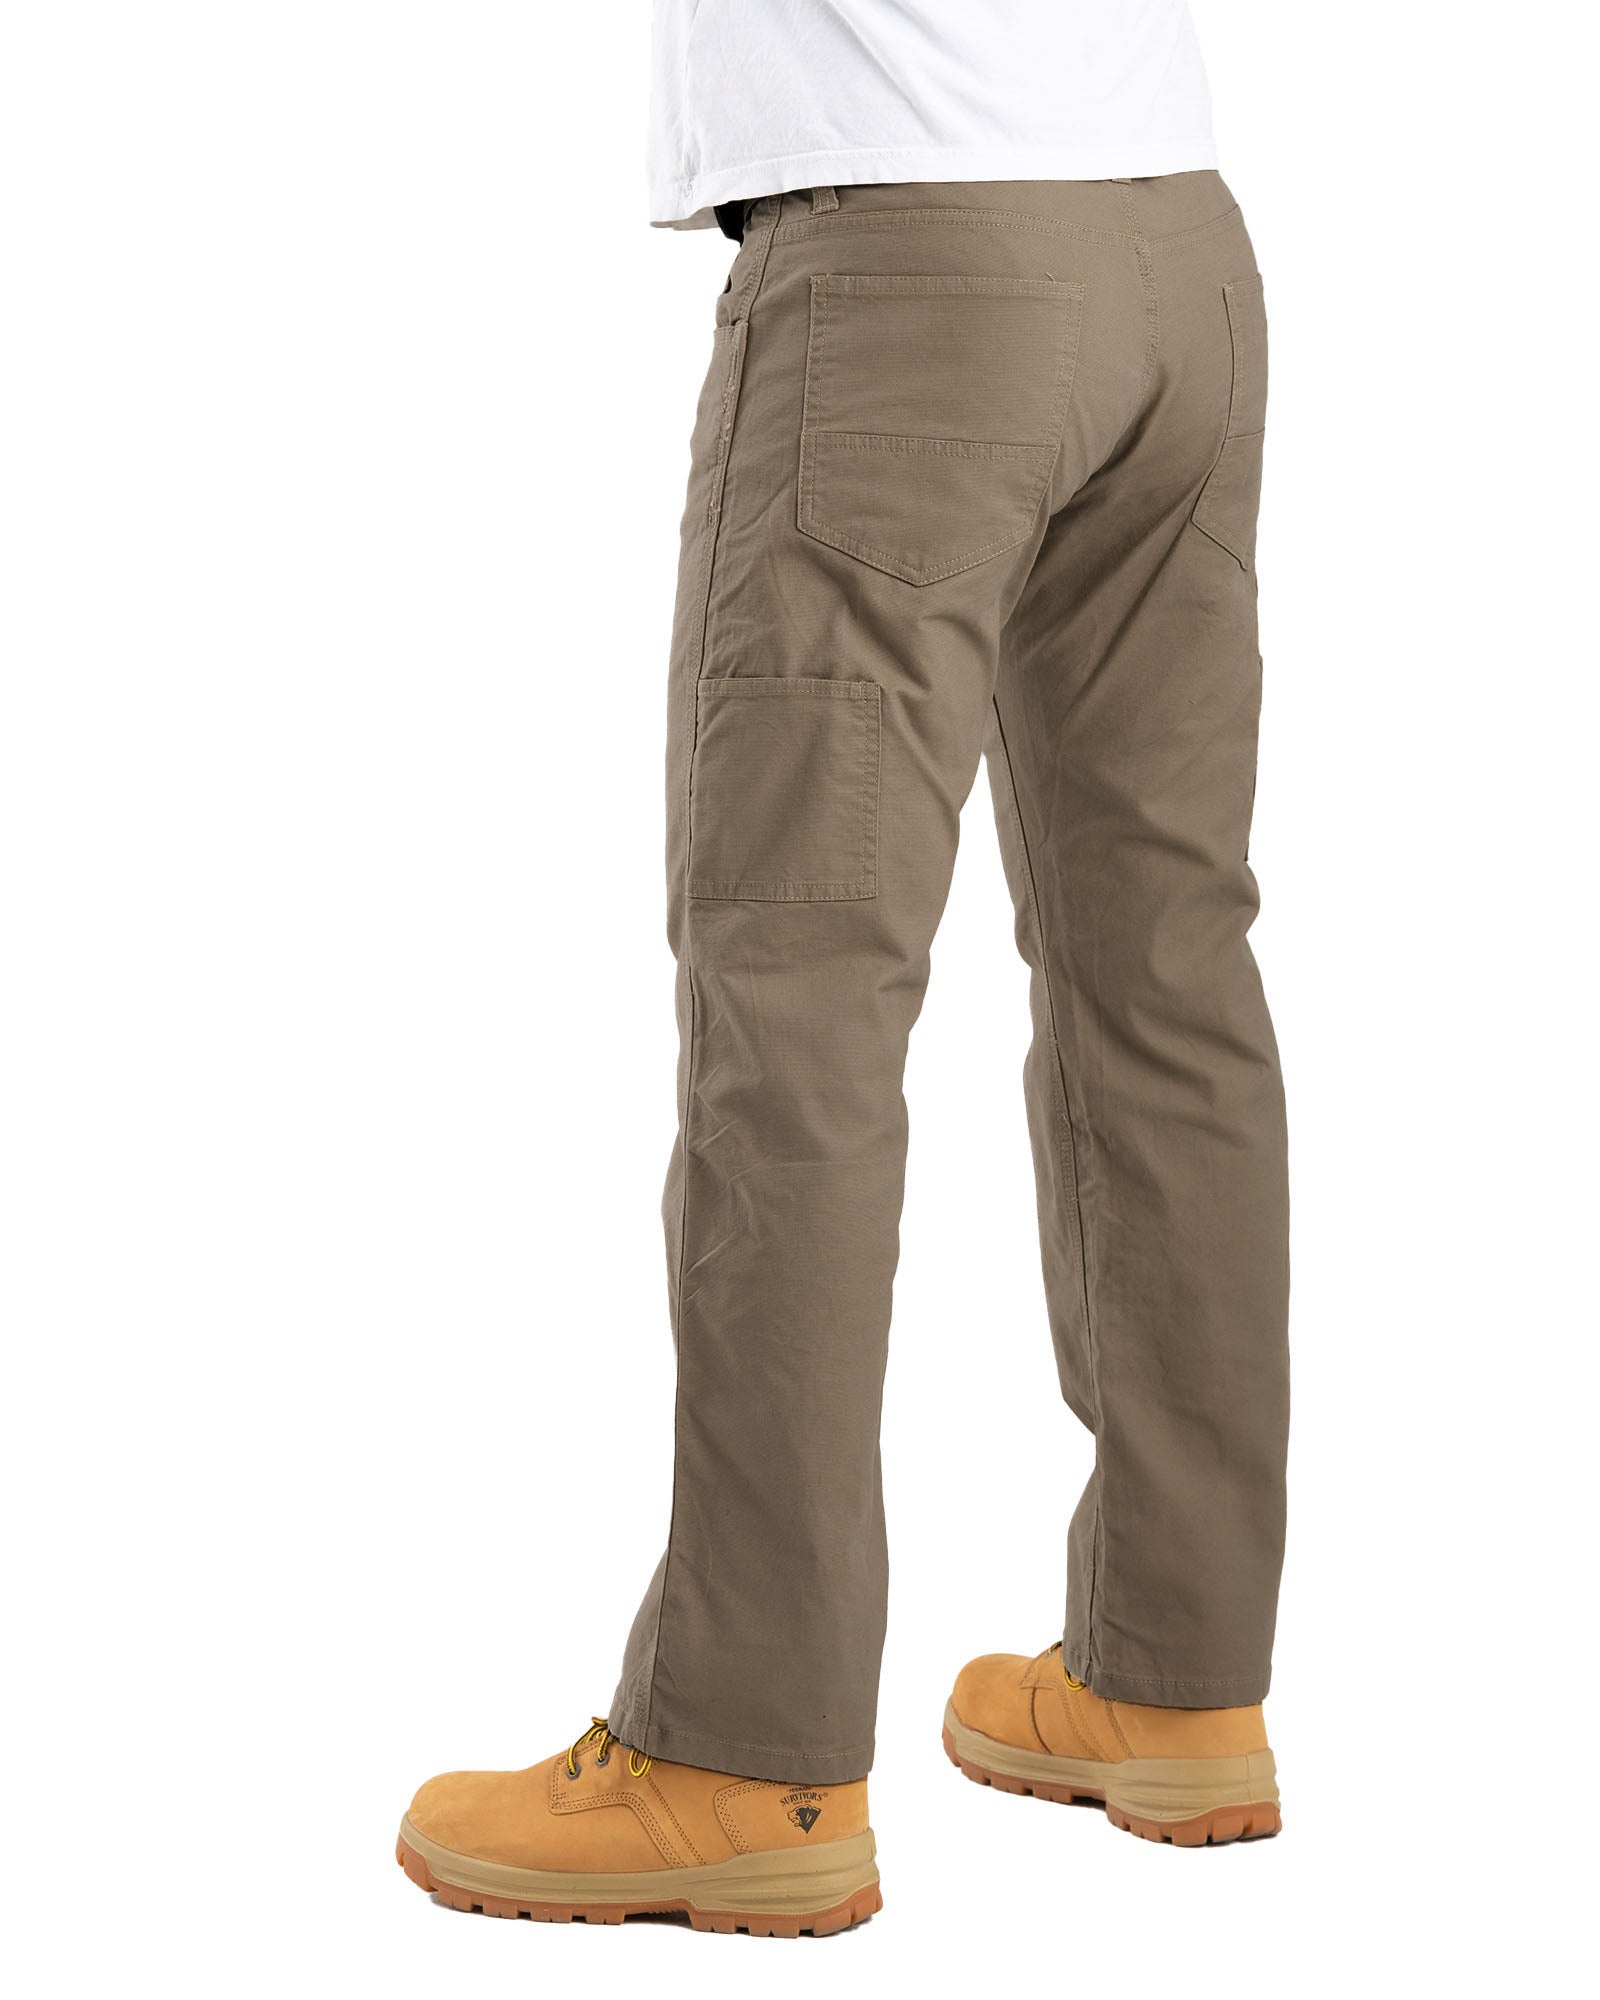 P921TKH Highland Flex Duck Relaxed Fit Carpenter Pant